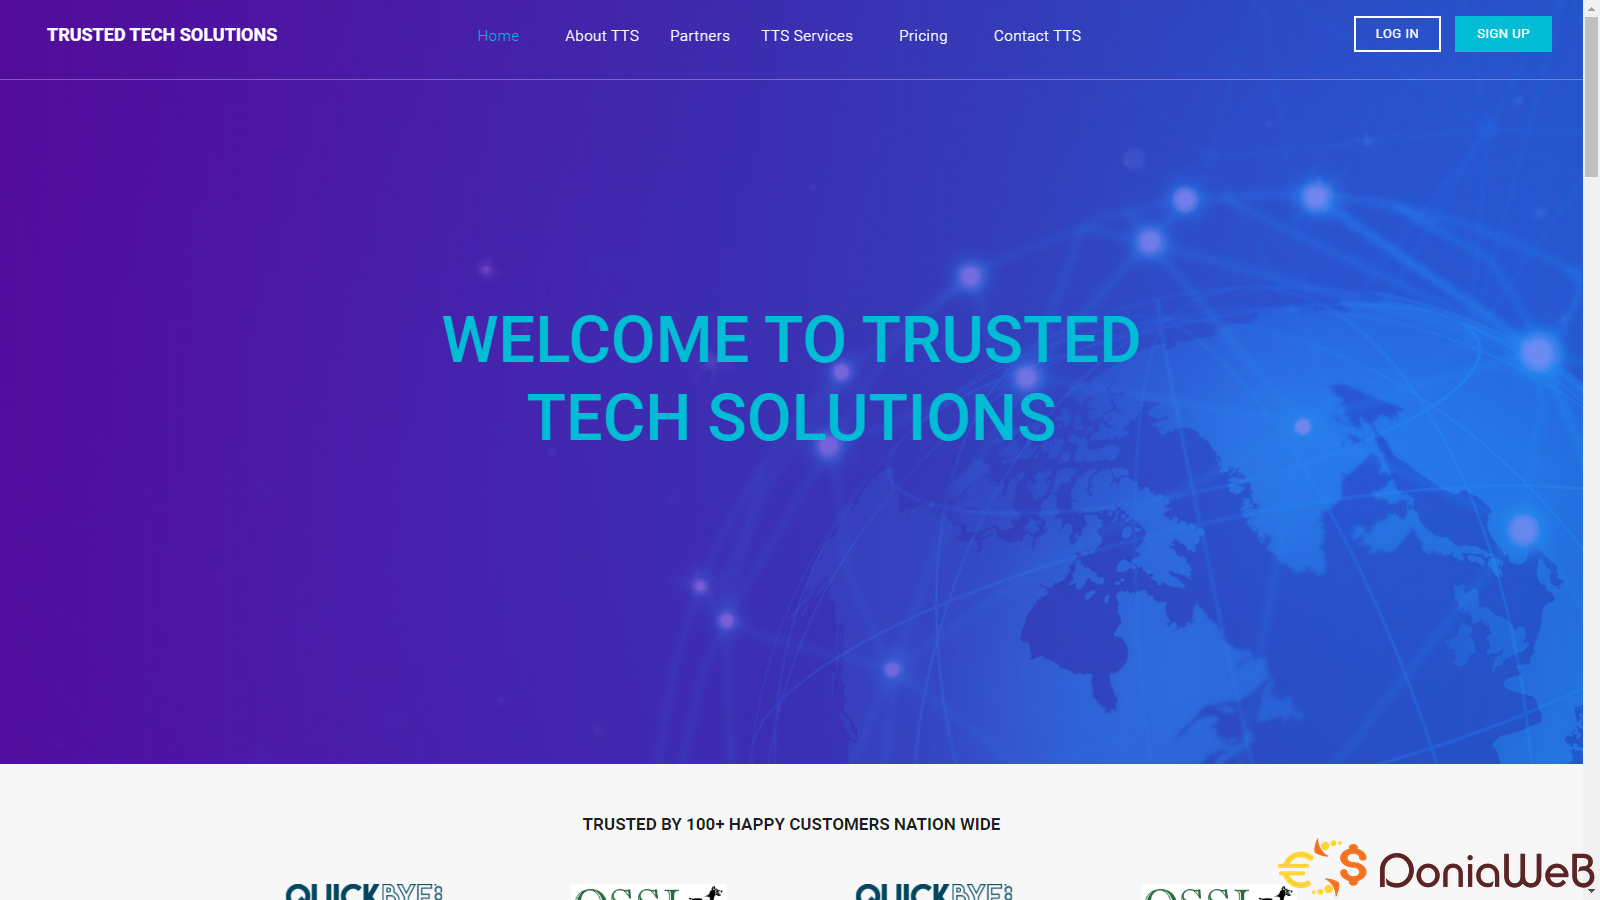 Trusted Tech Solutions WebSite Template